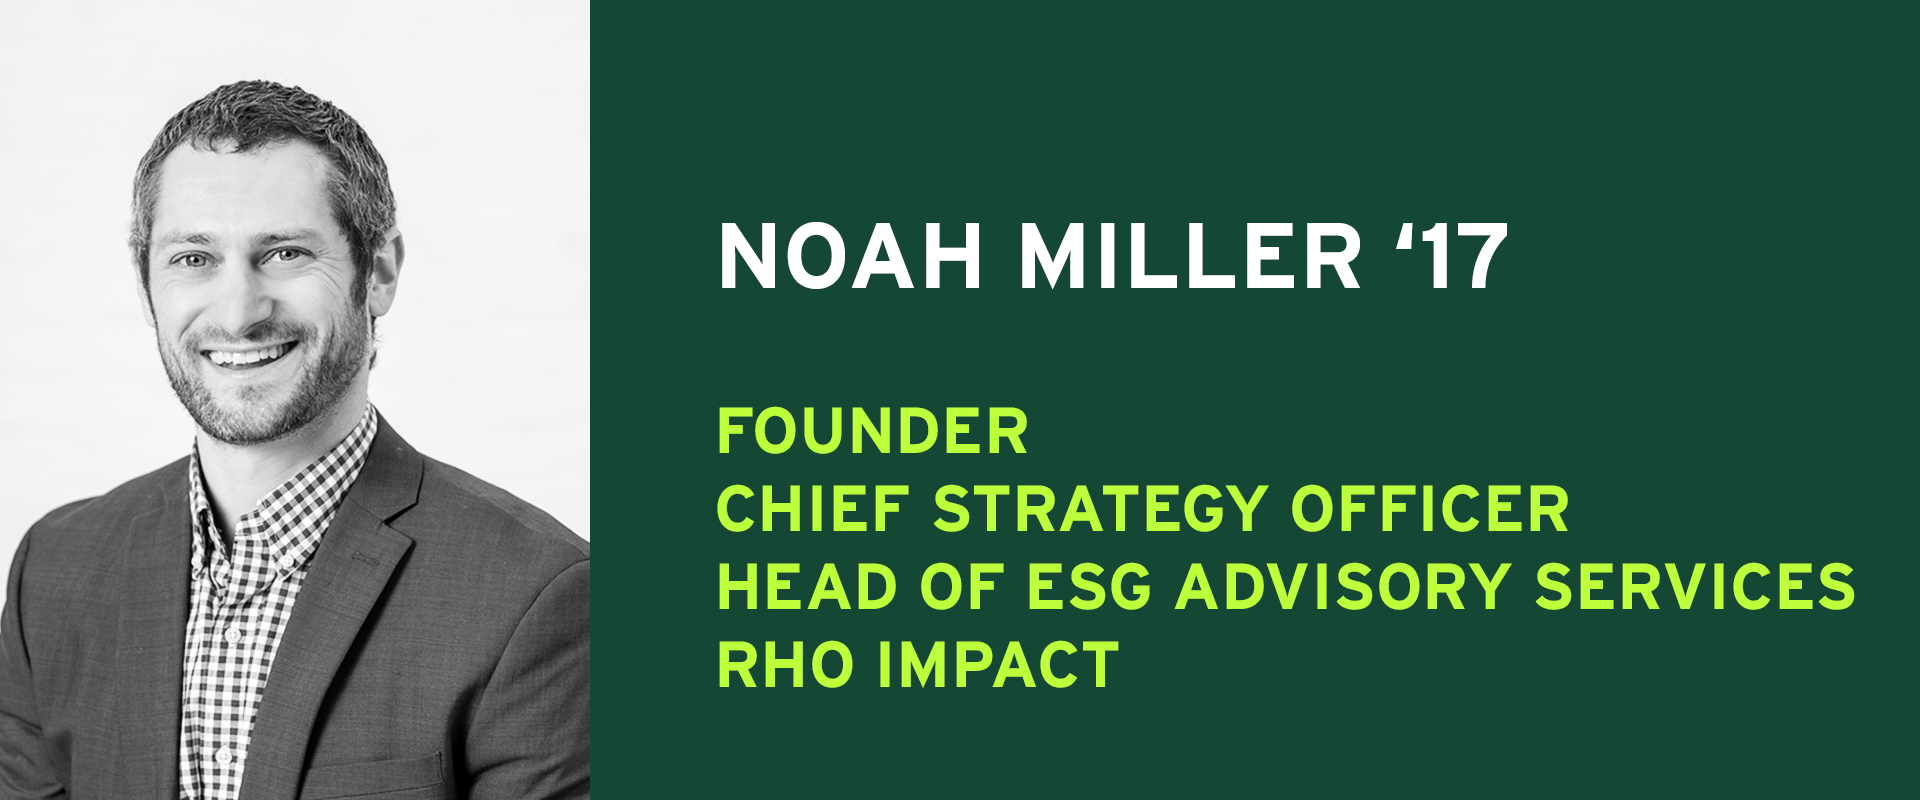 Noah Miller '17 Founder Chief Strategy Officer Head of ESG Advisor Services RHO Impact